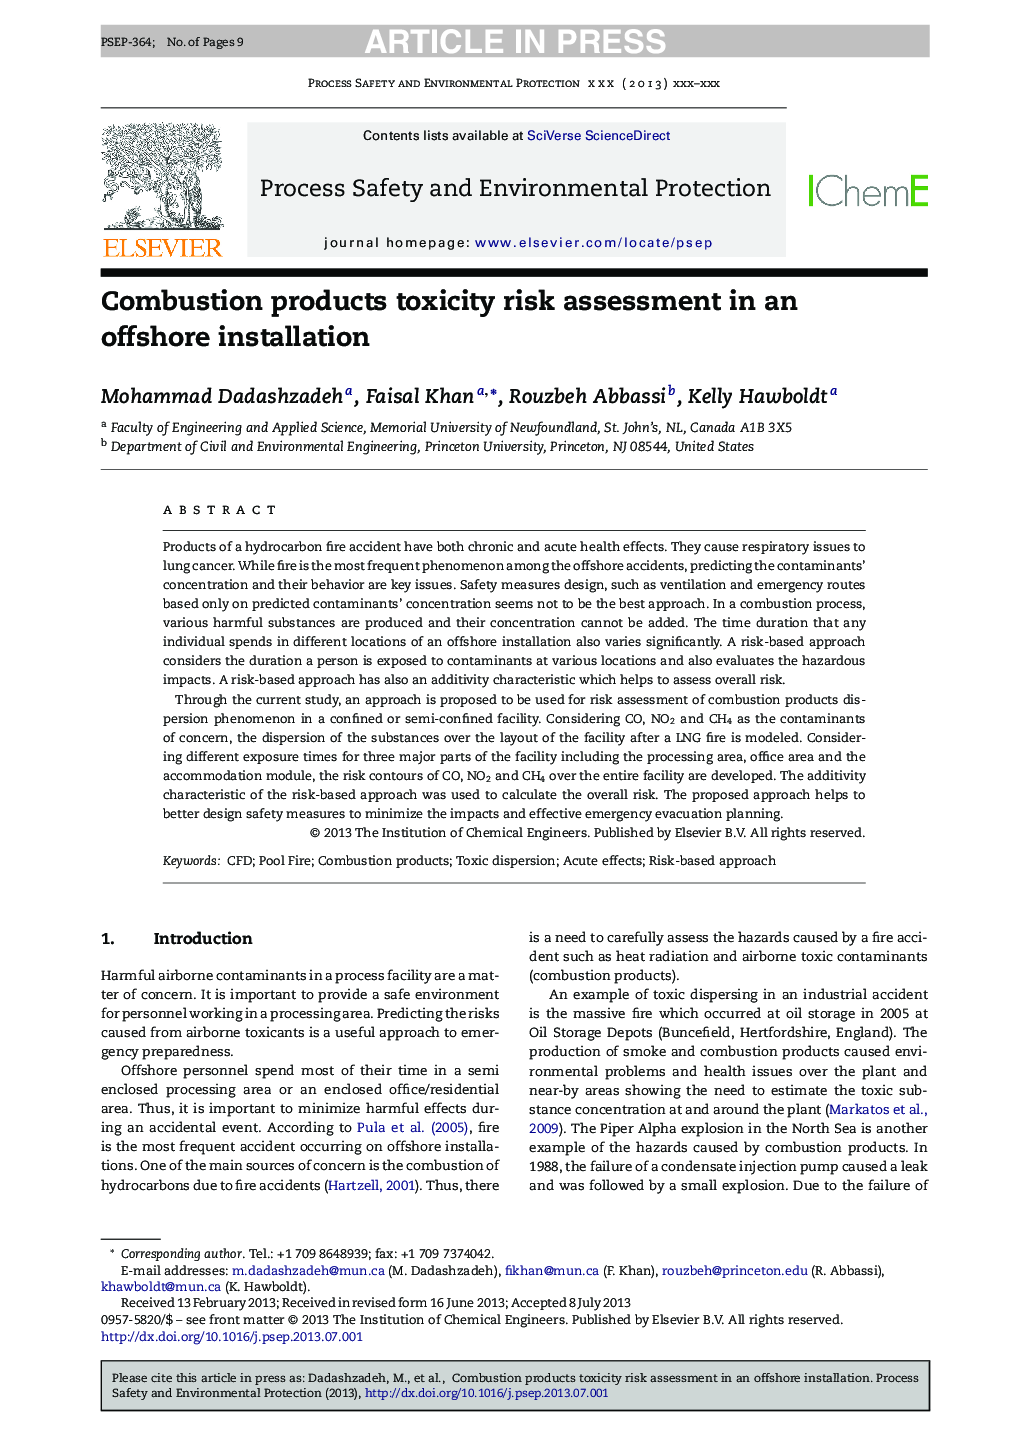 Combustion products toxicity risk assessment in an offshore installation